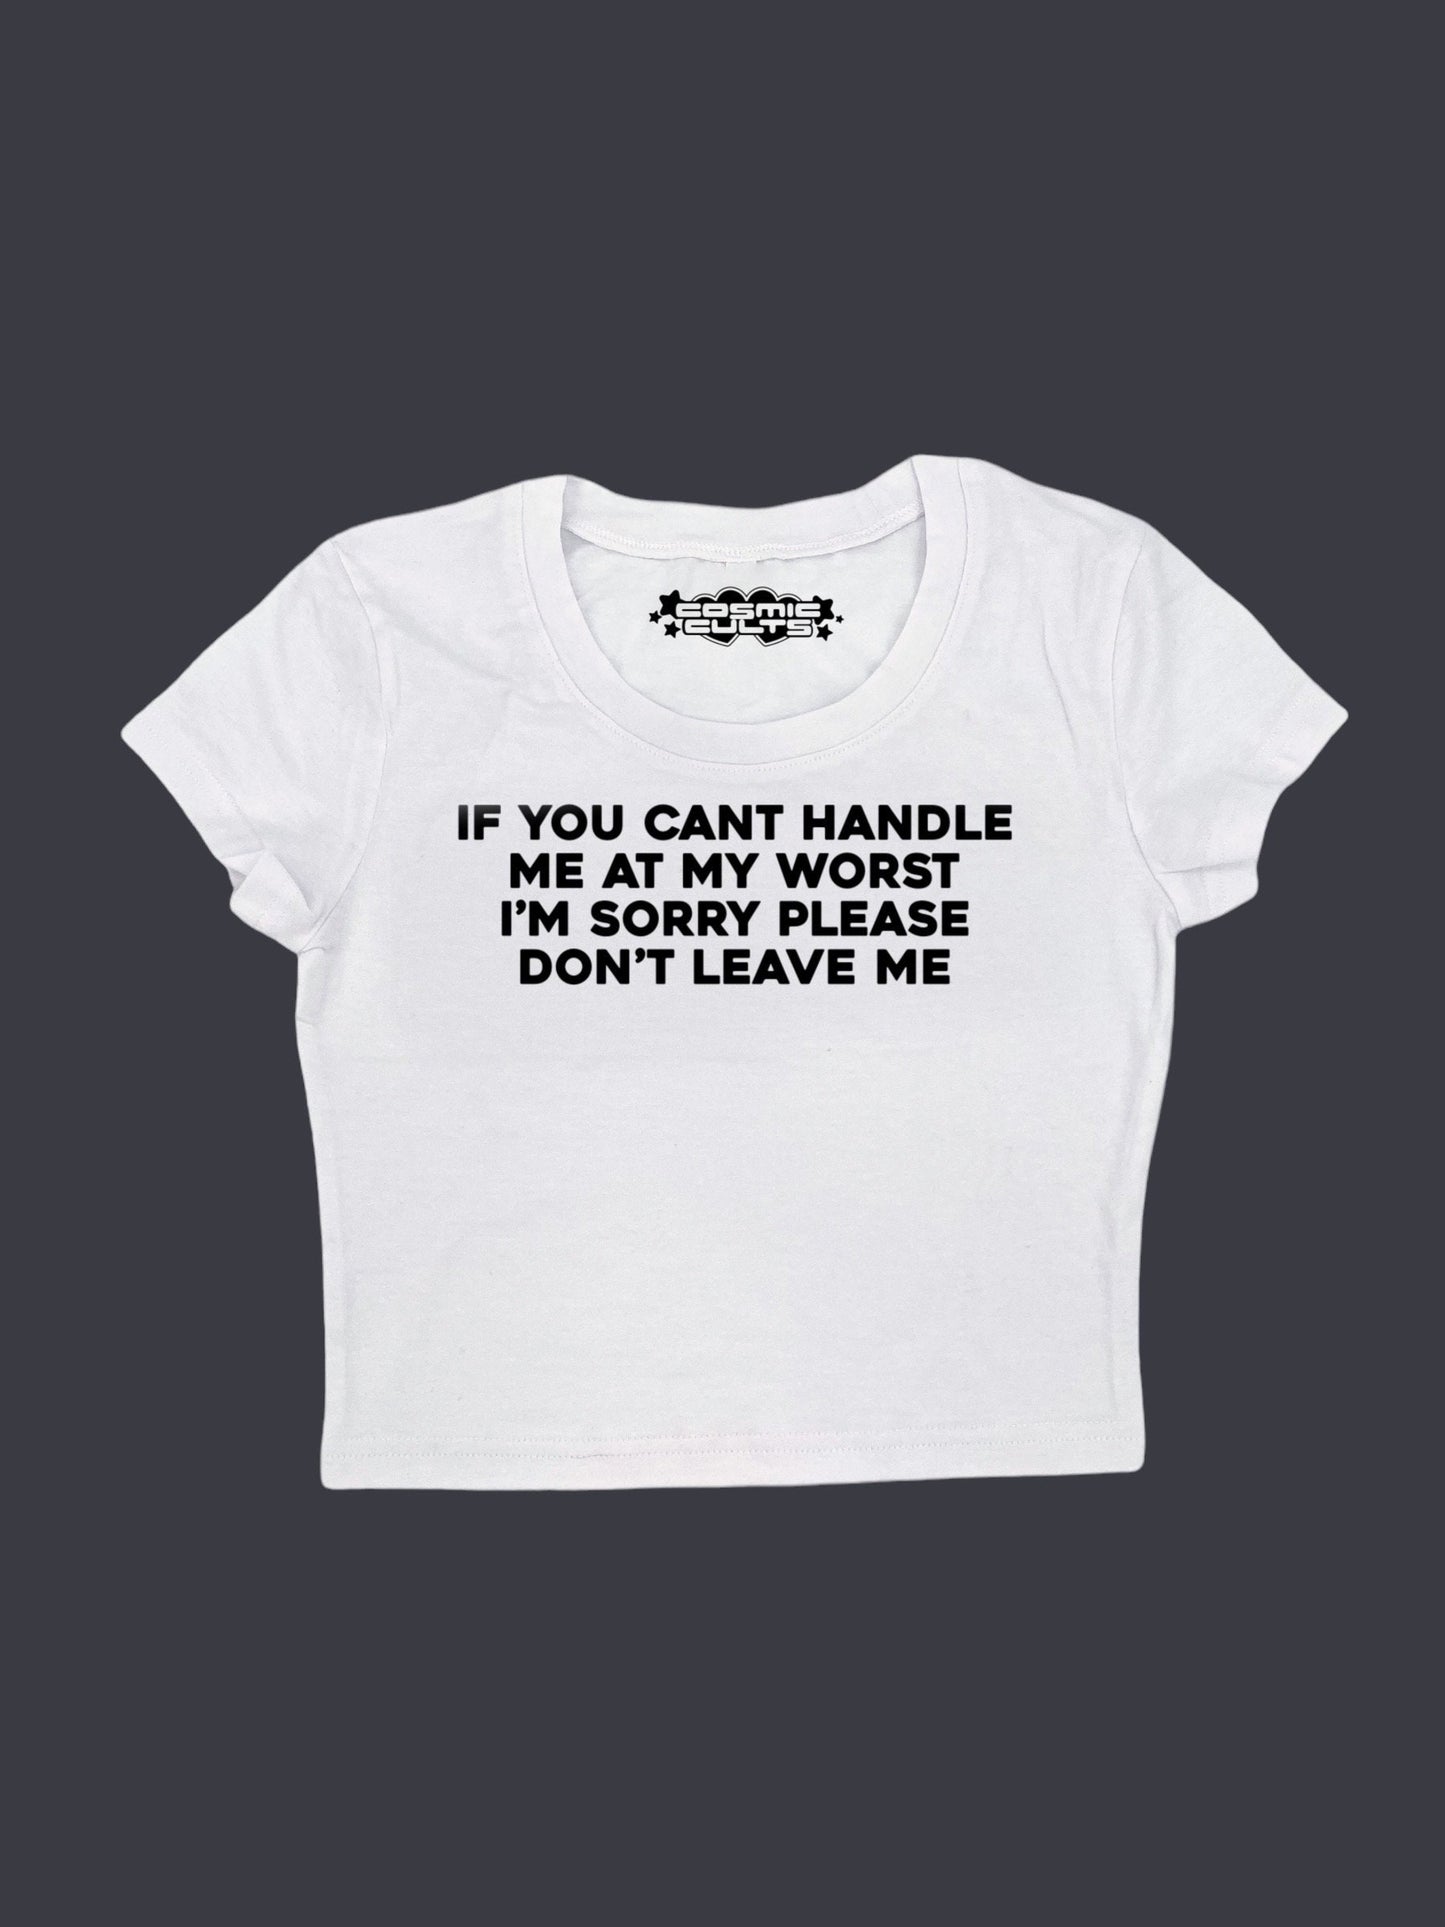 If You Can’t Handle Me At My Worst Im Sorry Please Don’t Leave Me Y2K crop top baby tee shirt